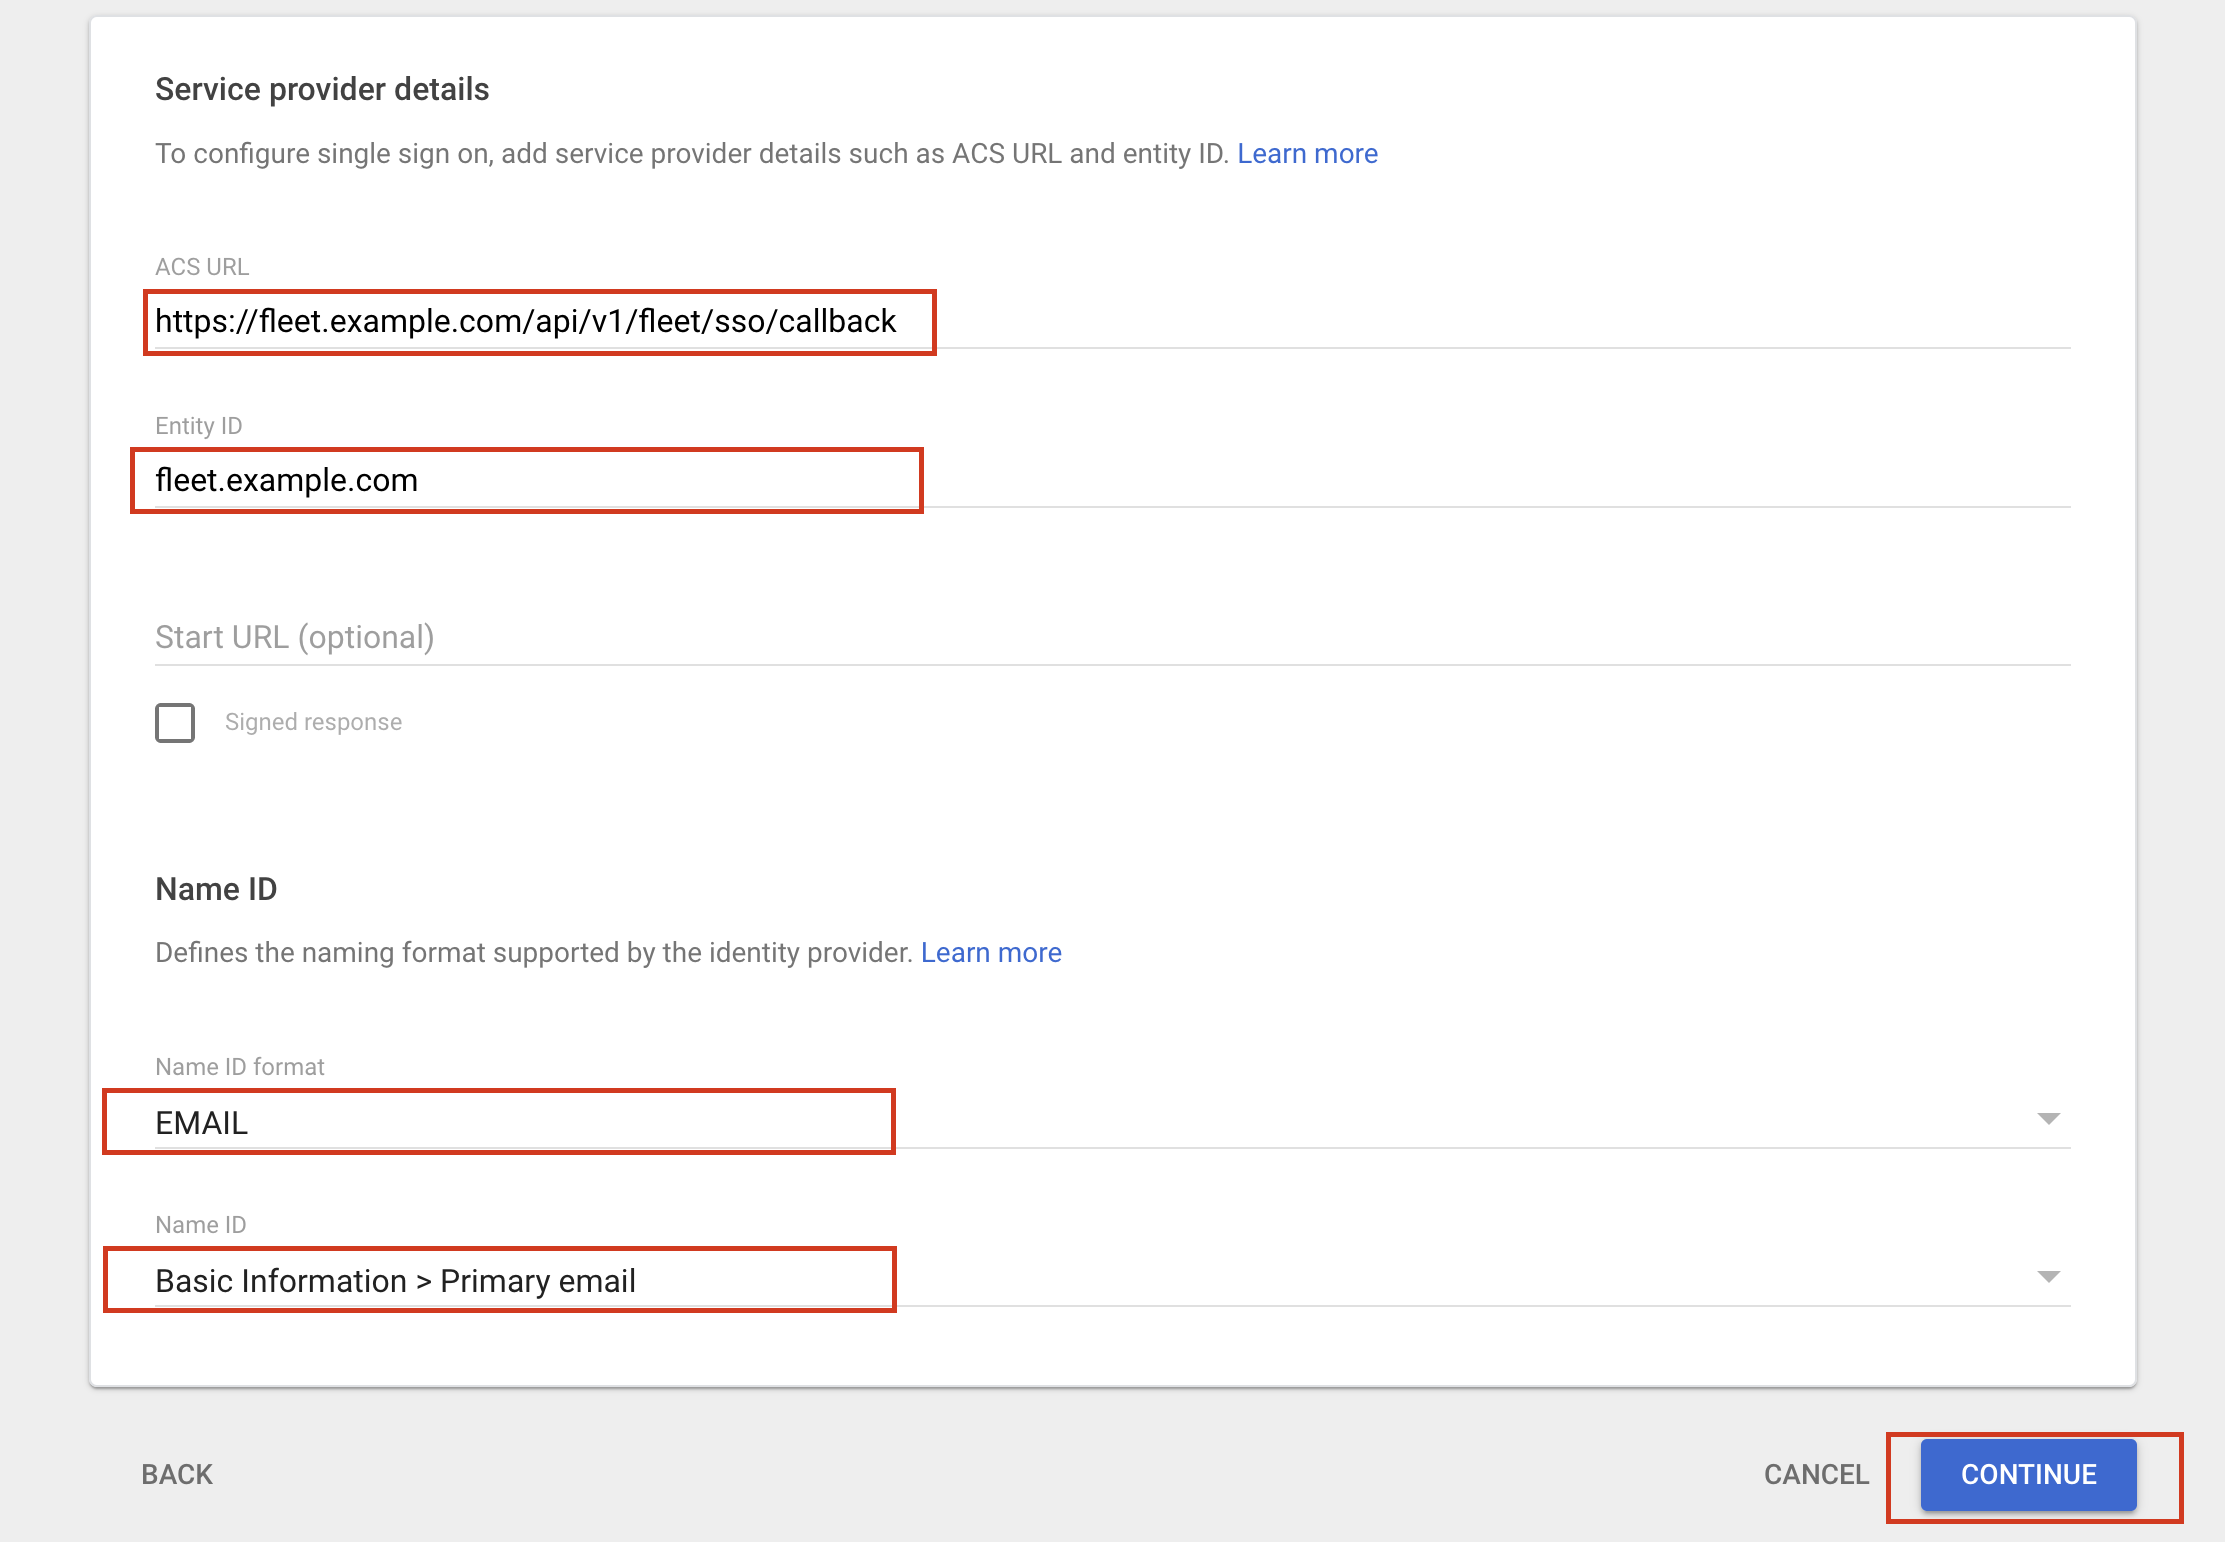 Configuring the service provider details in Google Workspace